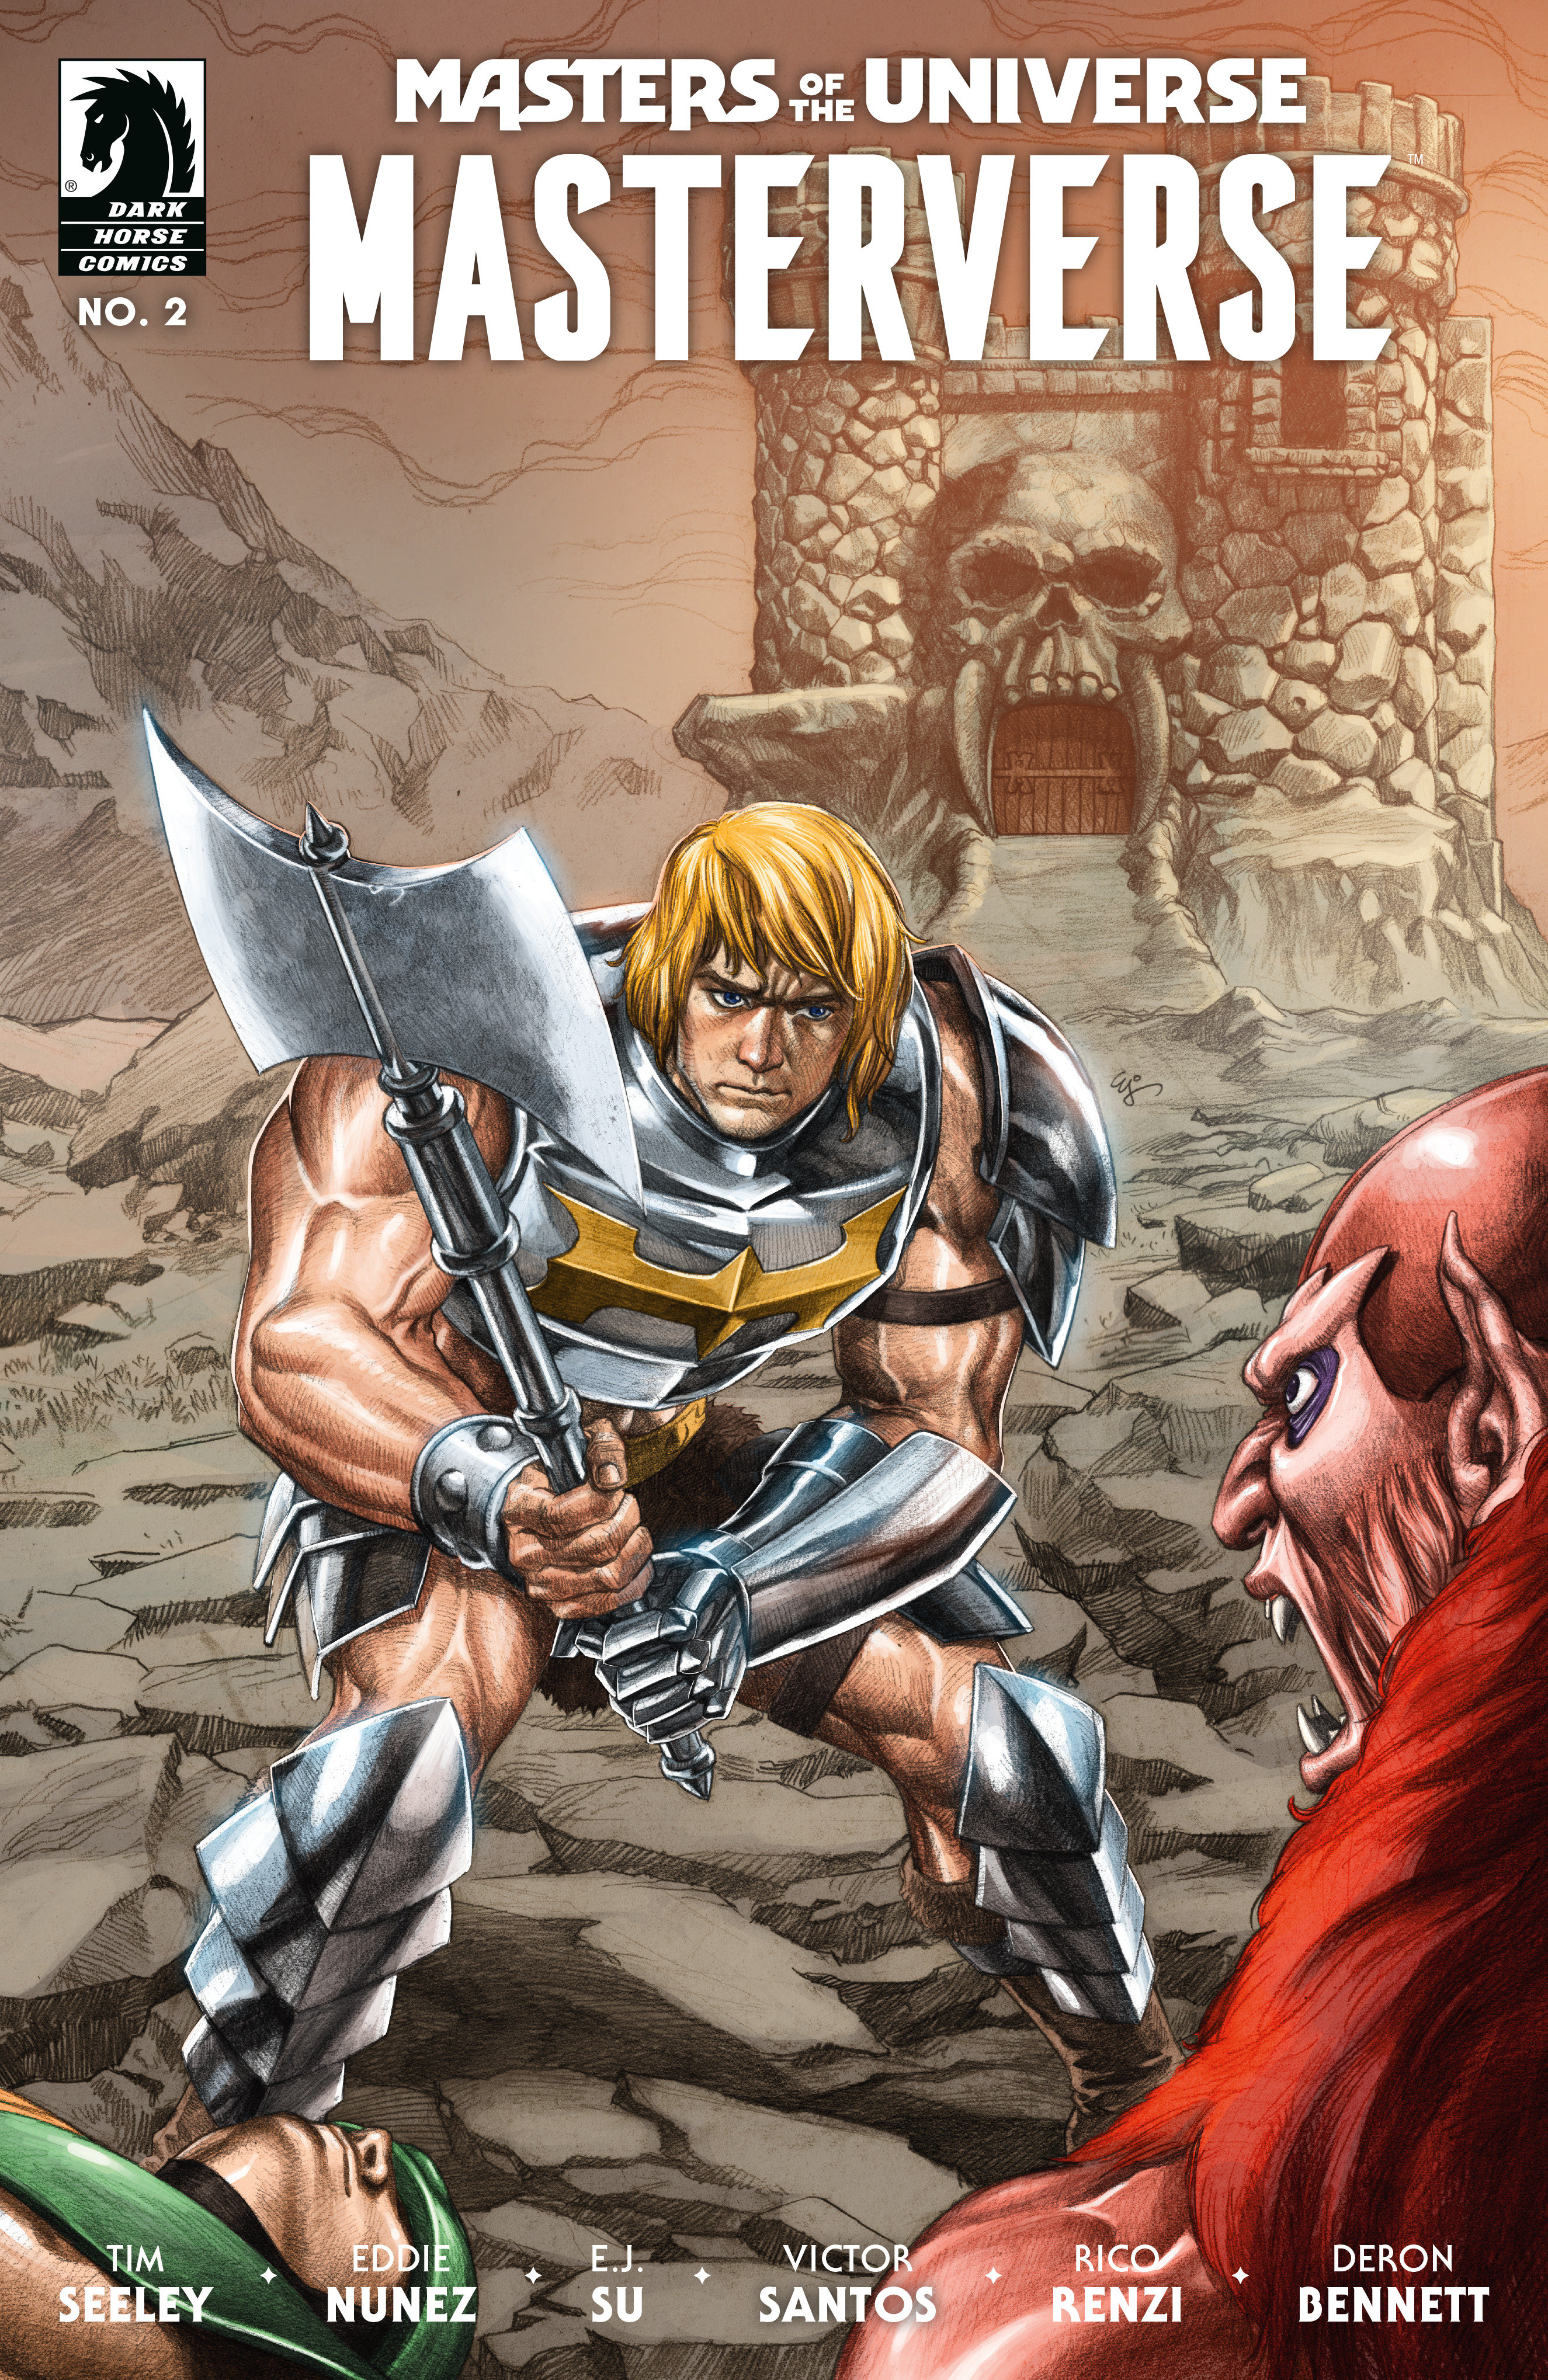 Masters of the Universe: Forge of Destiny #2 Cover B (Tim Seeley)